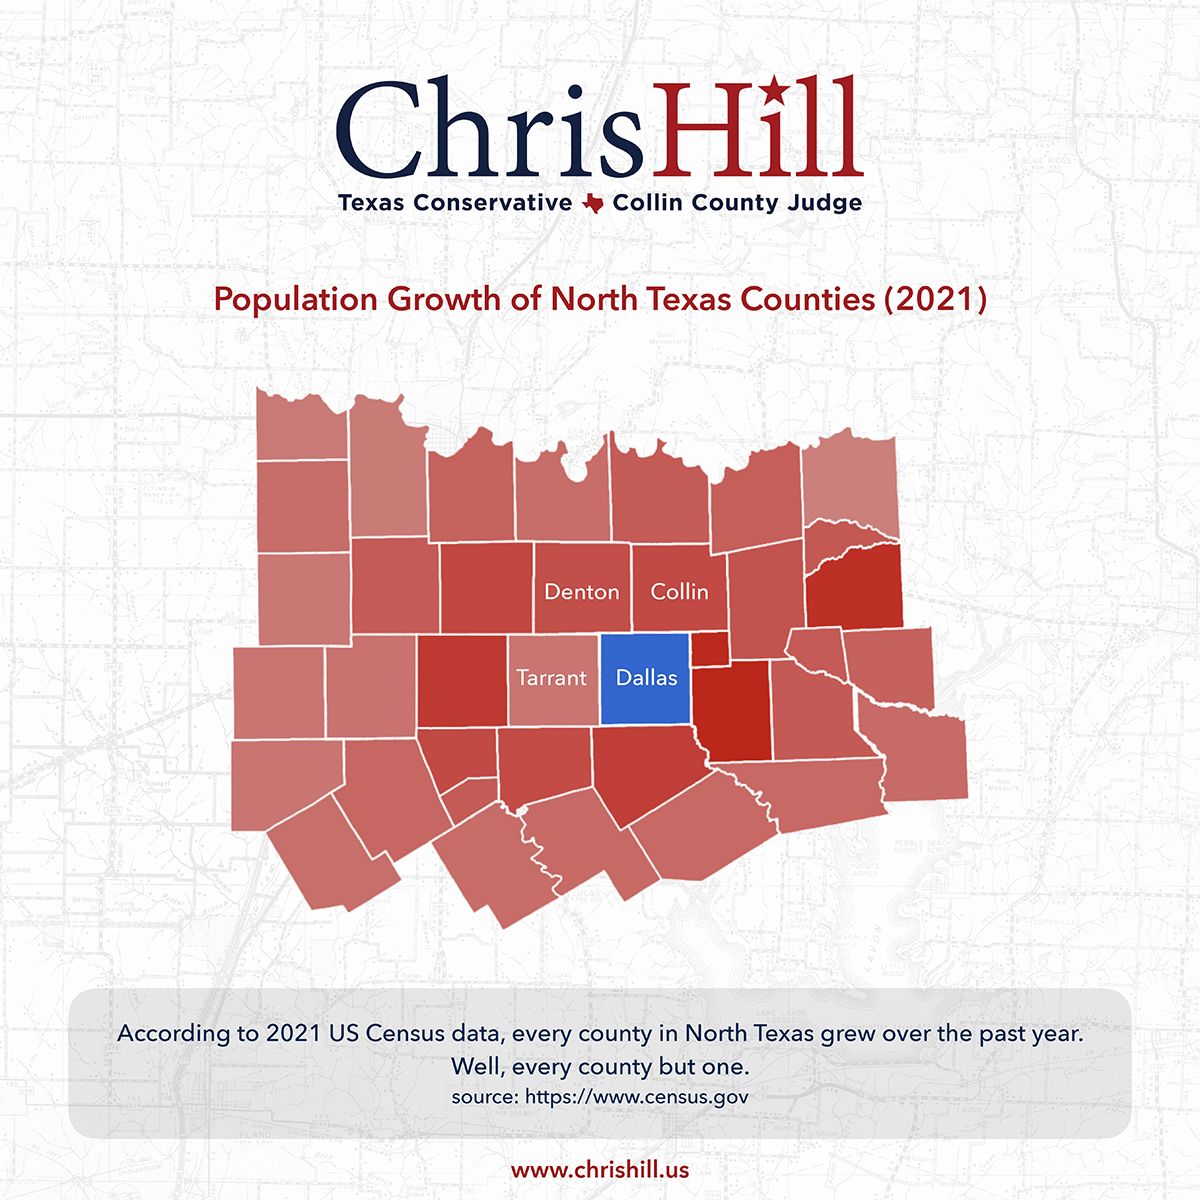 Population Growth of North Texas Counties (2021)